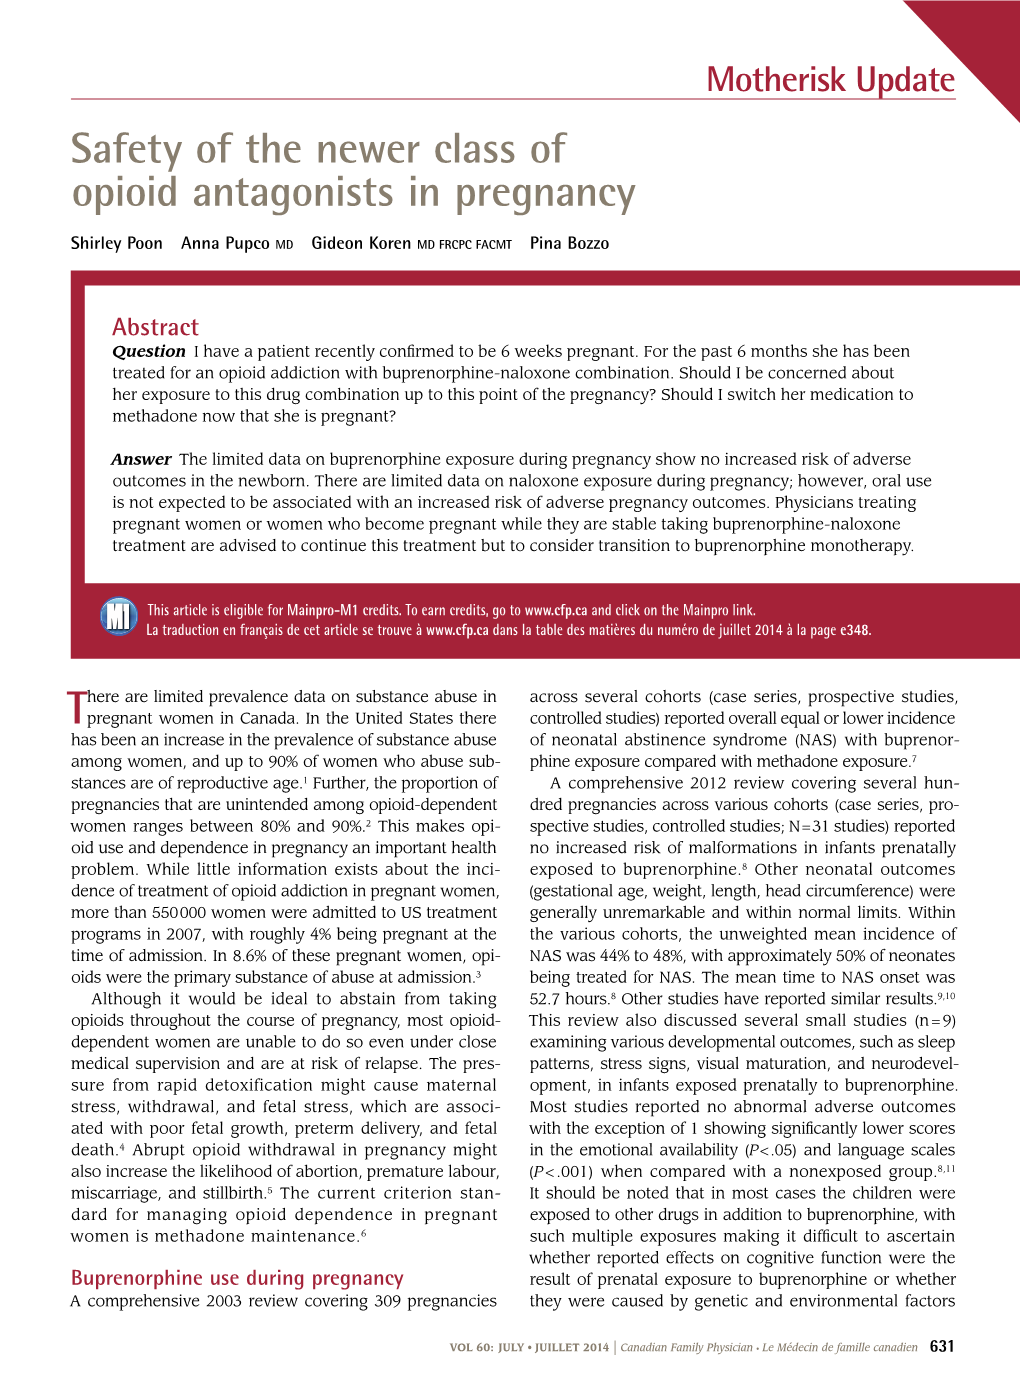 Safety of the Newer Class of Opioid Antagonists in Pregnancy